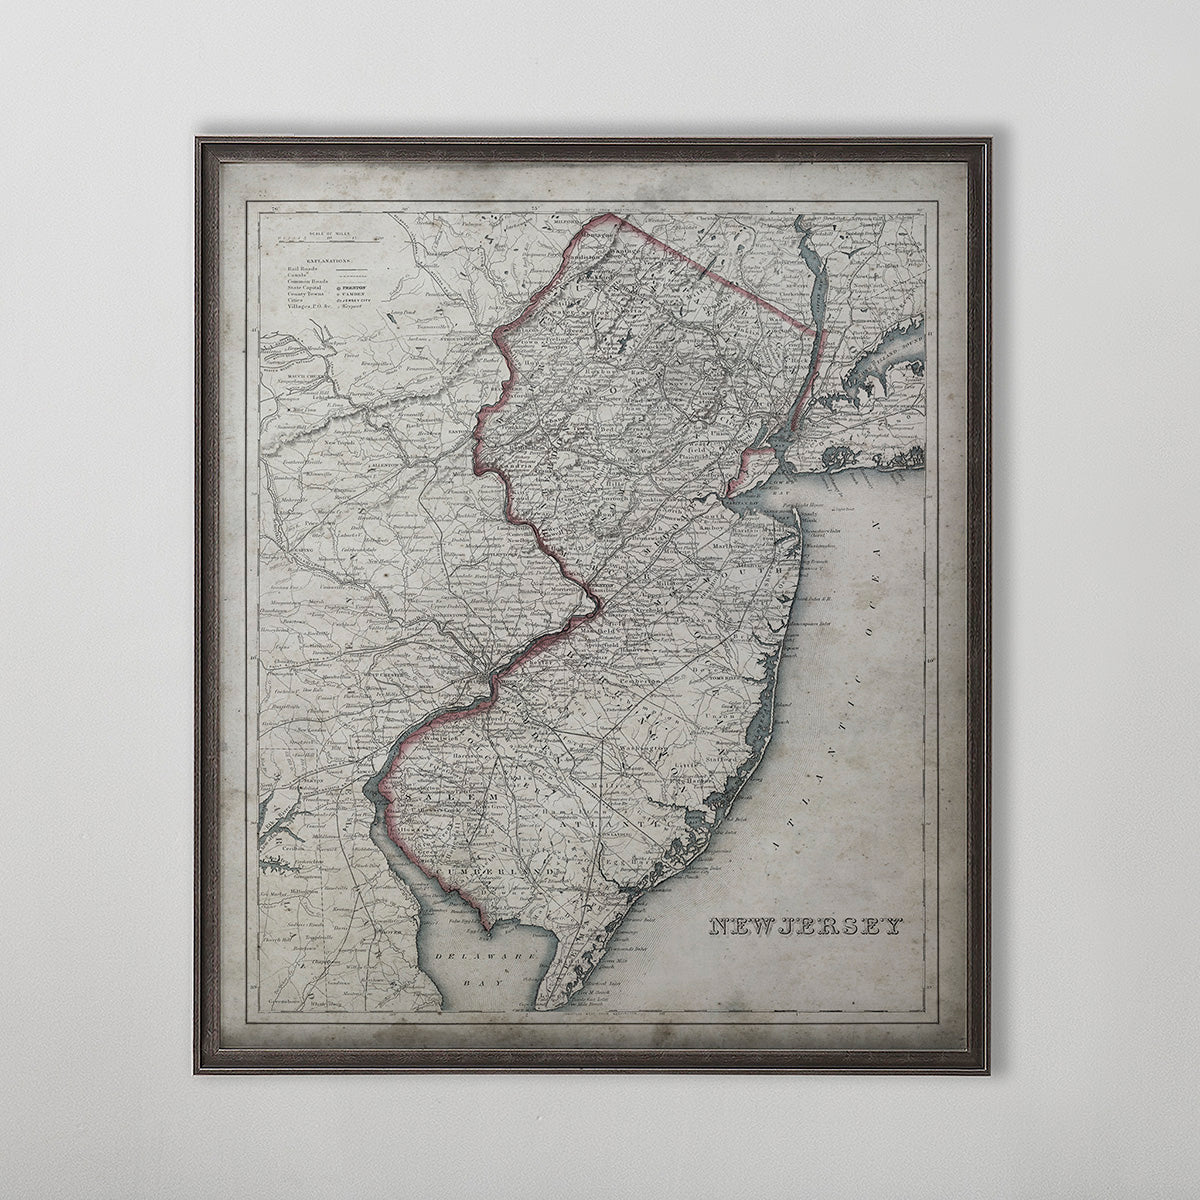 Old vintage historic map of New Jersey for wall art home decor. 